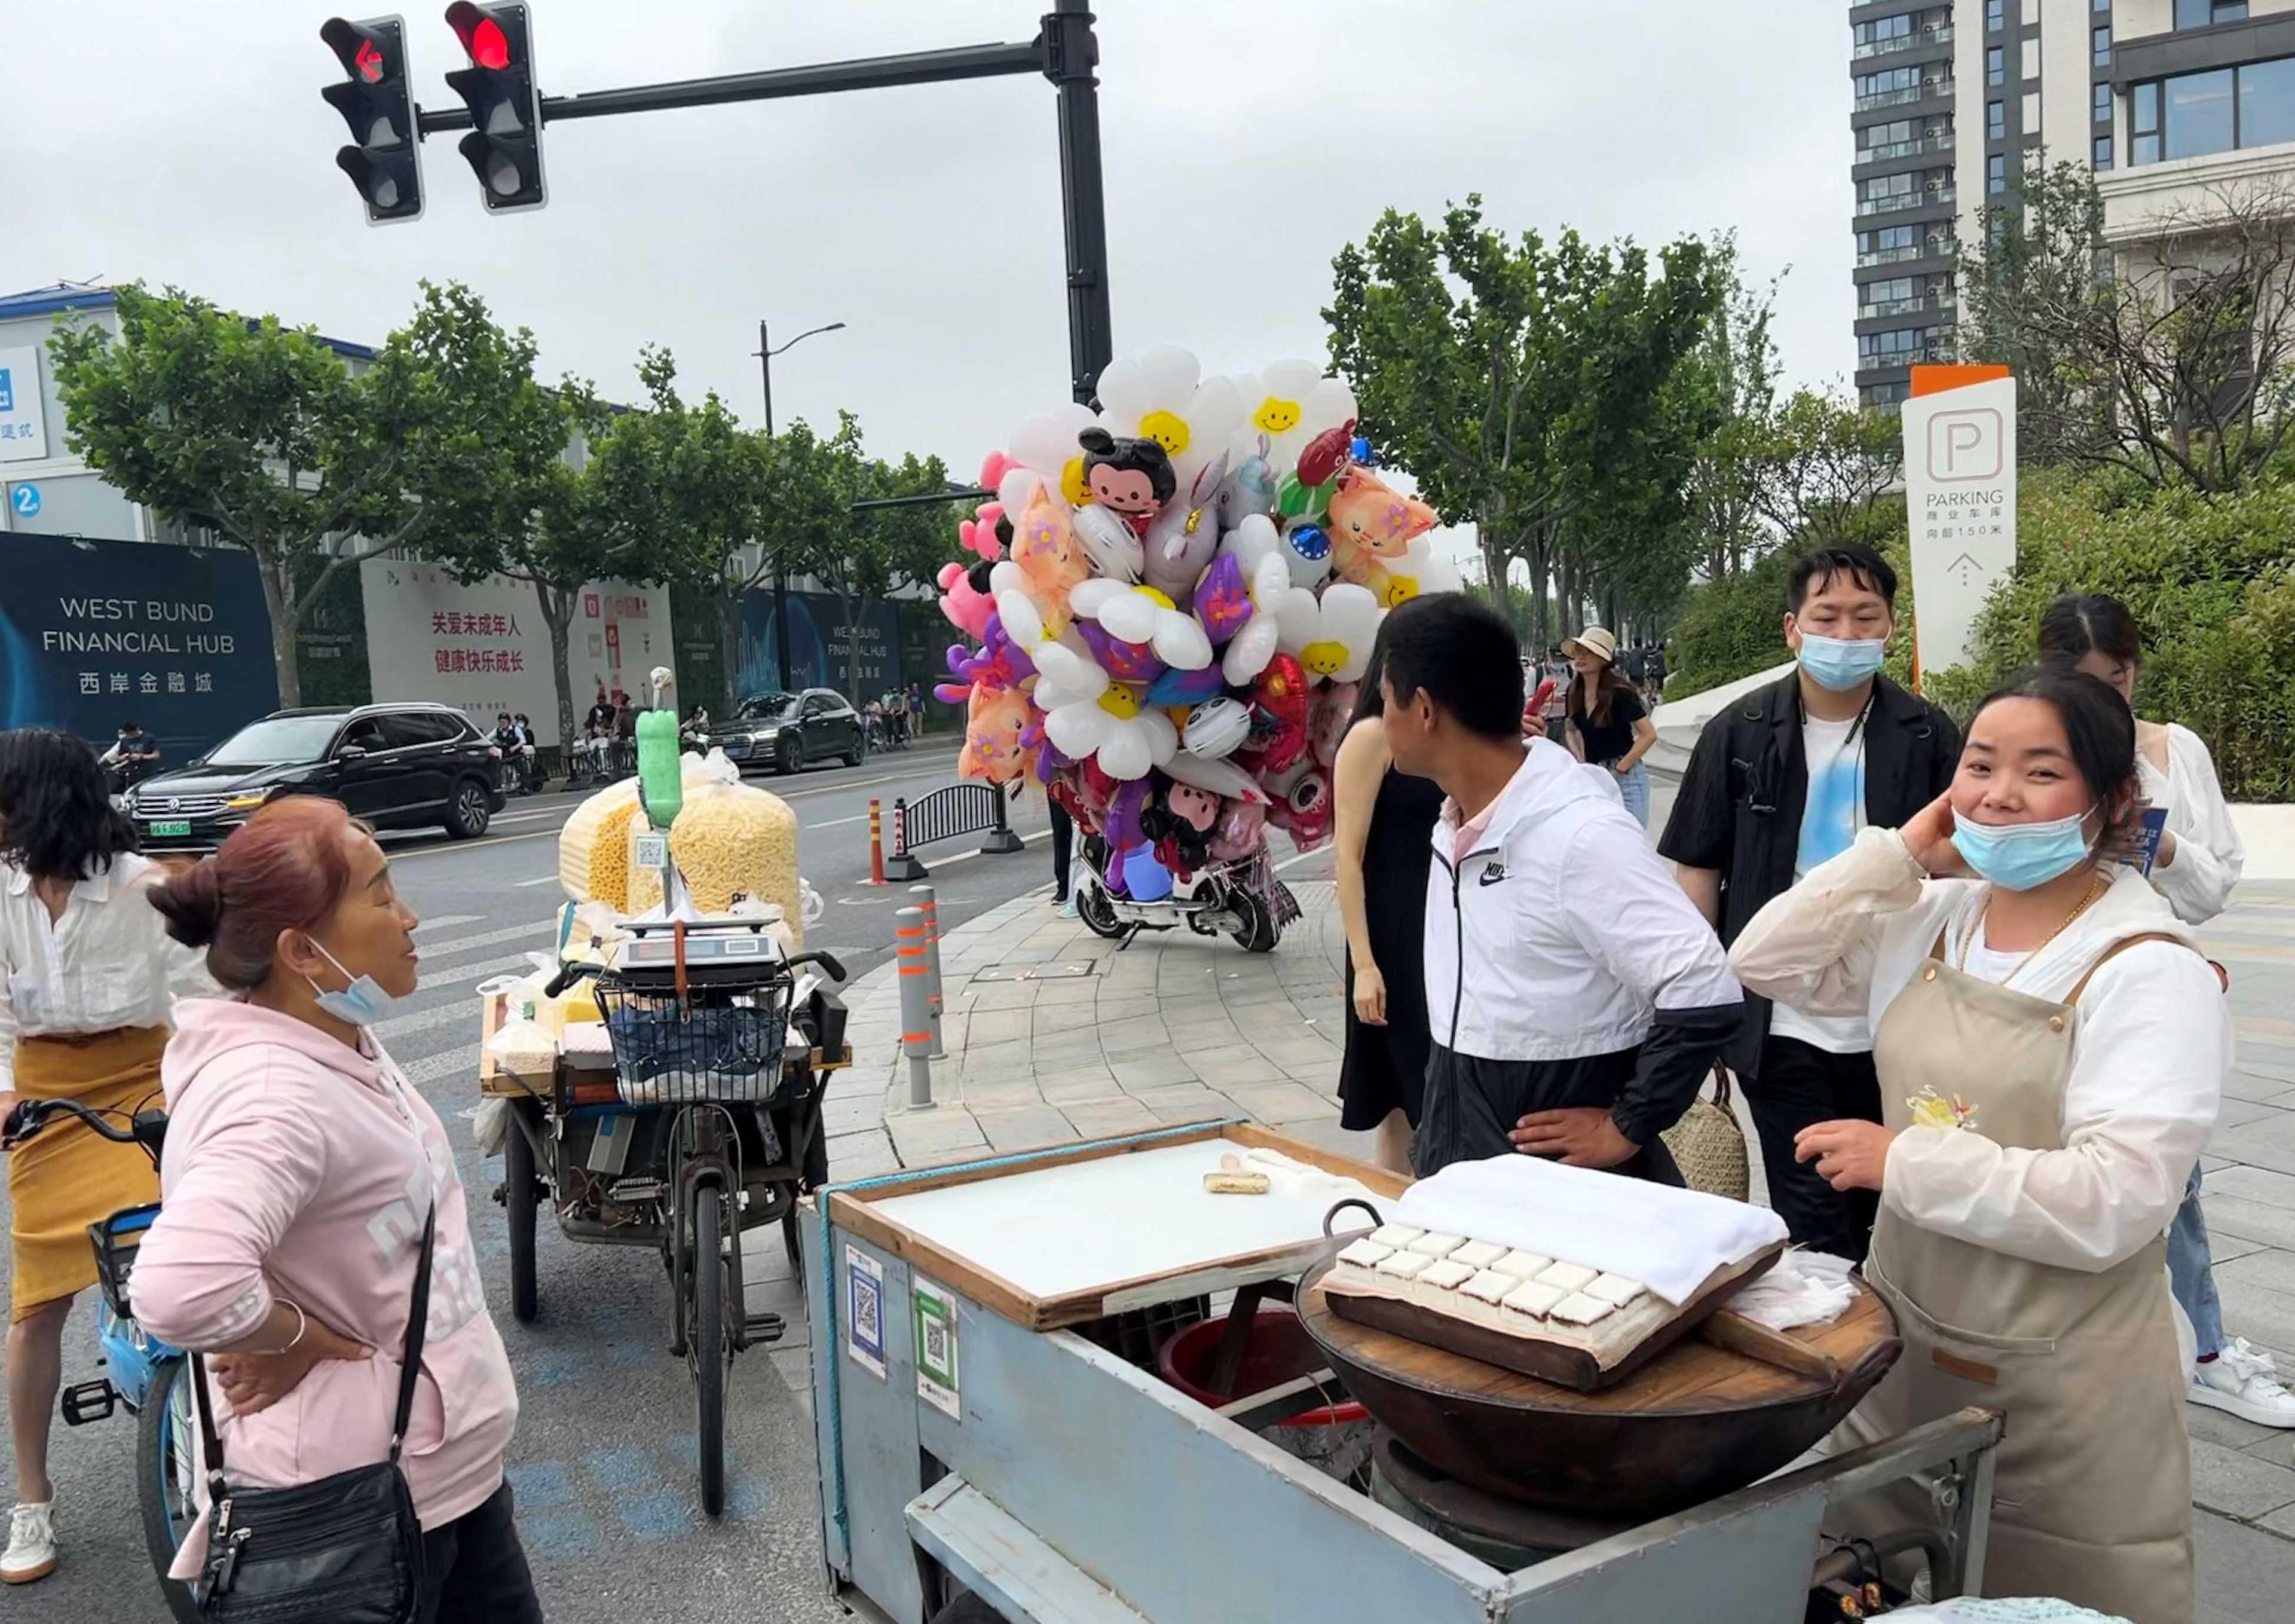 2023-05-30T010312Z_1094673443_RC2181A390NQ_RTRMADP_3_CHINA-ECONOMY-HAWKERS